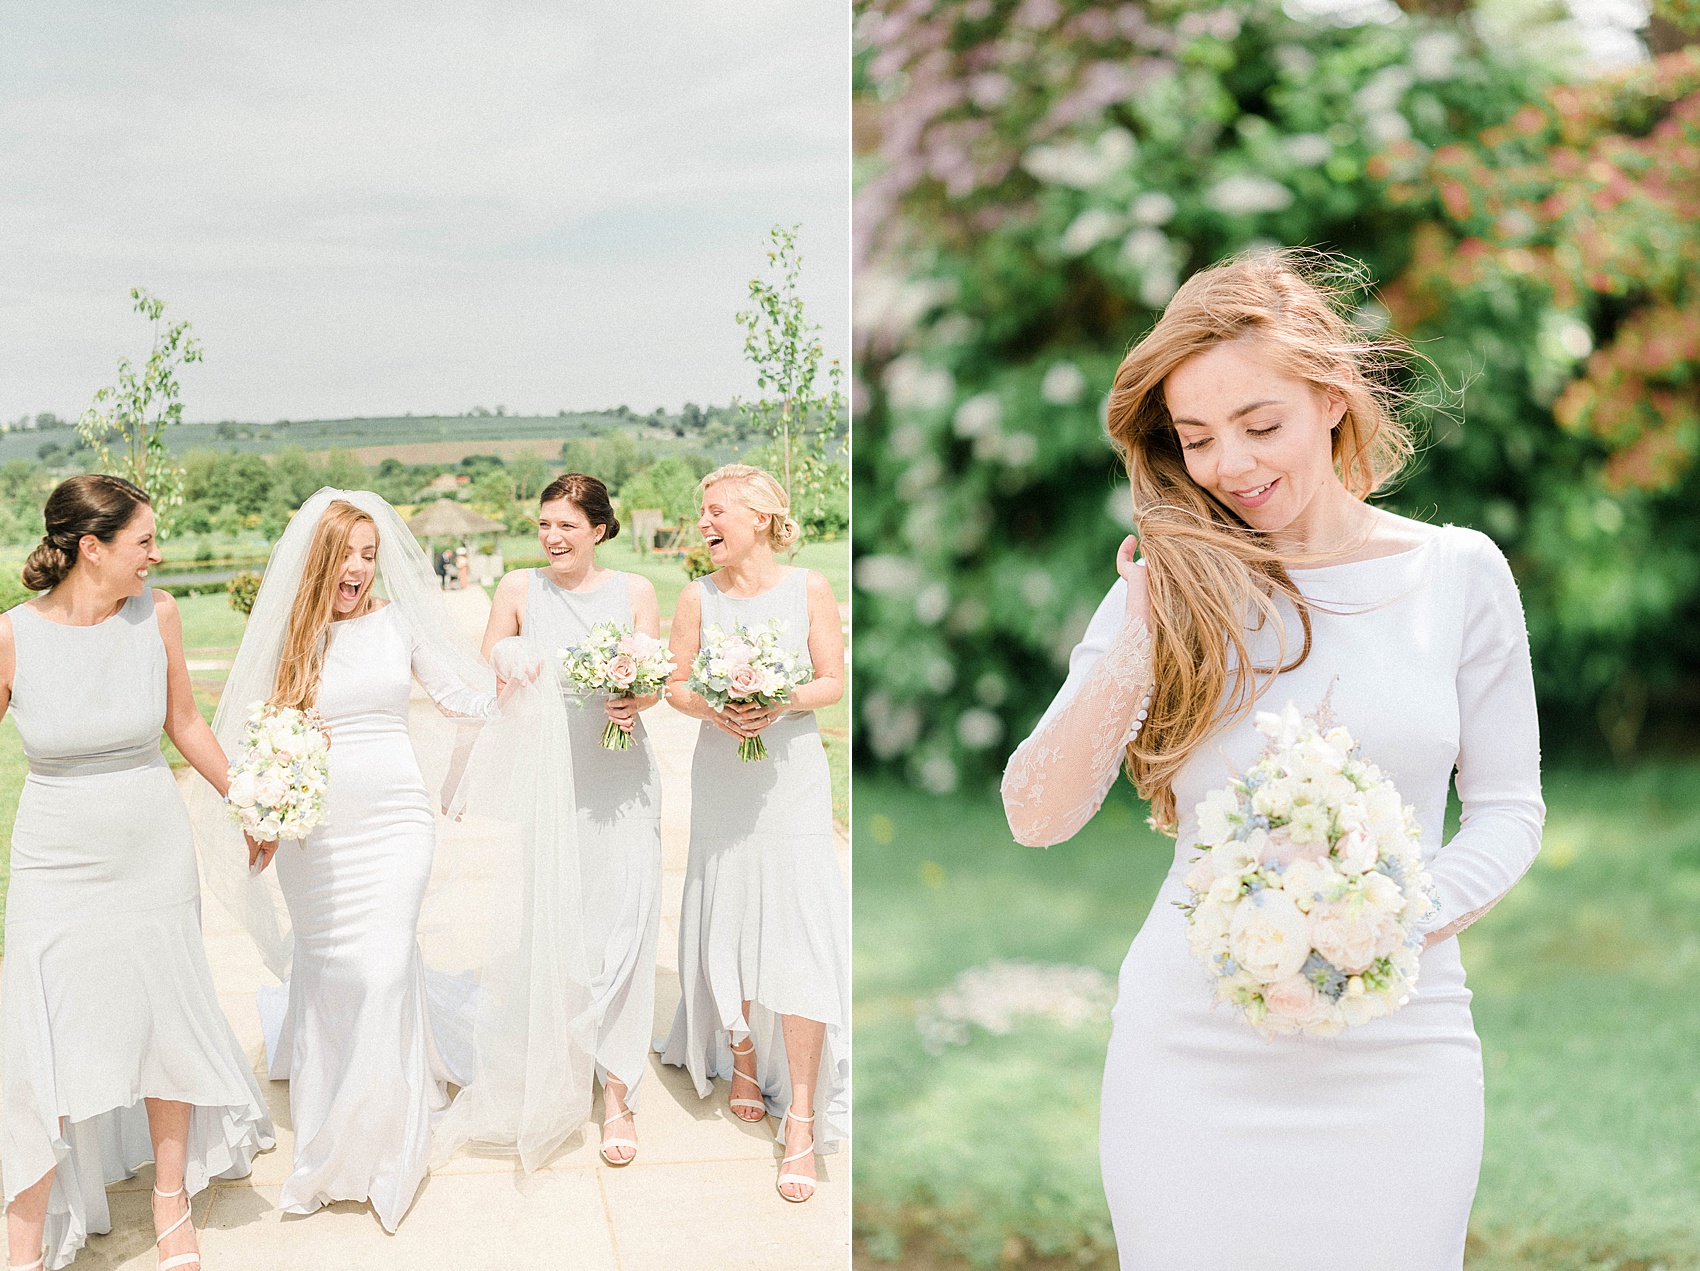  Pronovias modern dress Yorkshire wedding - A Pronovias Dress Embroidered with Forget-me-nots for an Italian Inspired, Flower-Filled Spring Wedding in Yorkshire